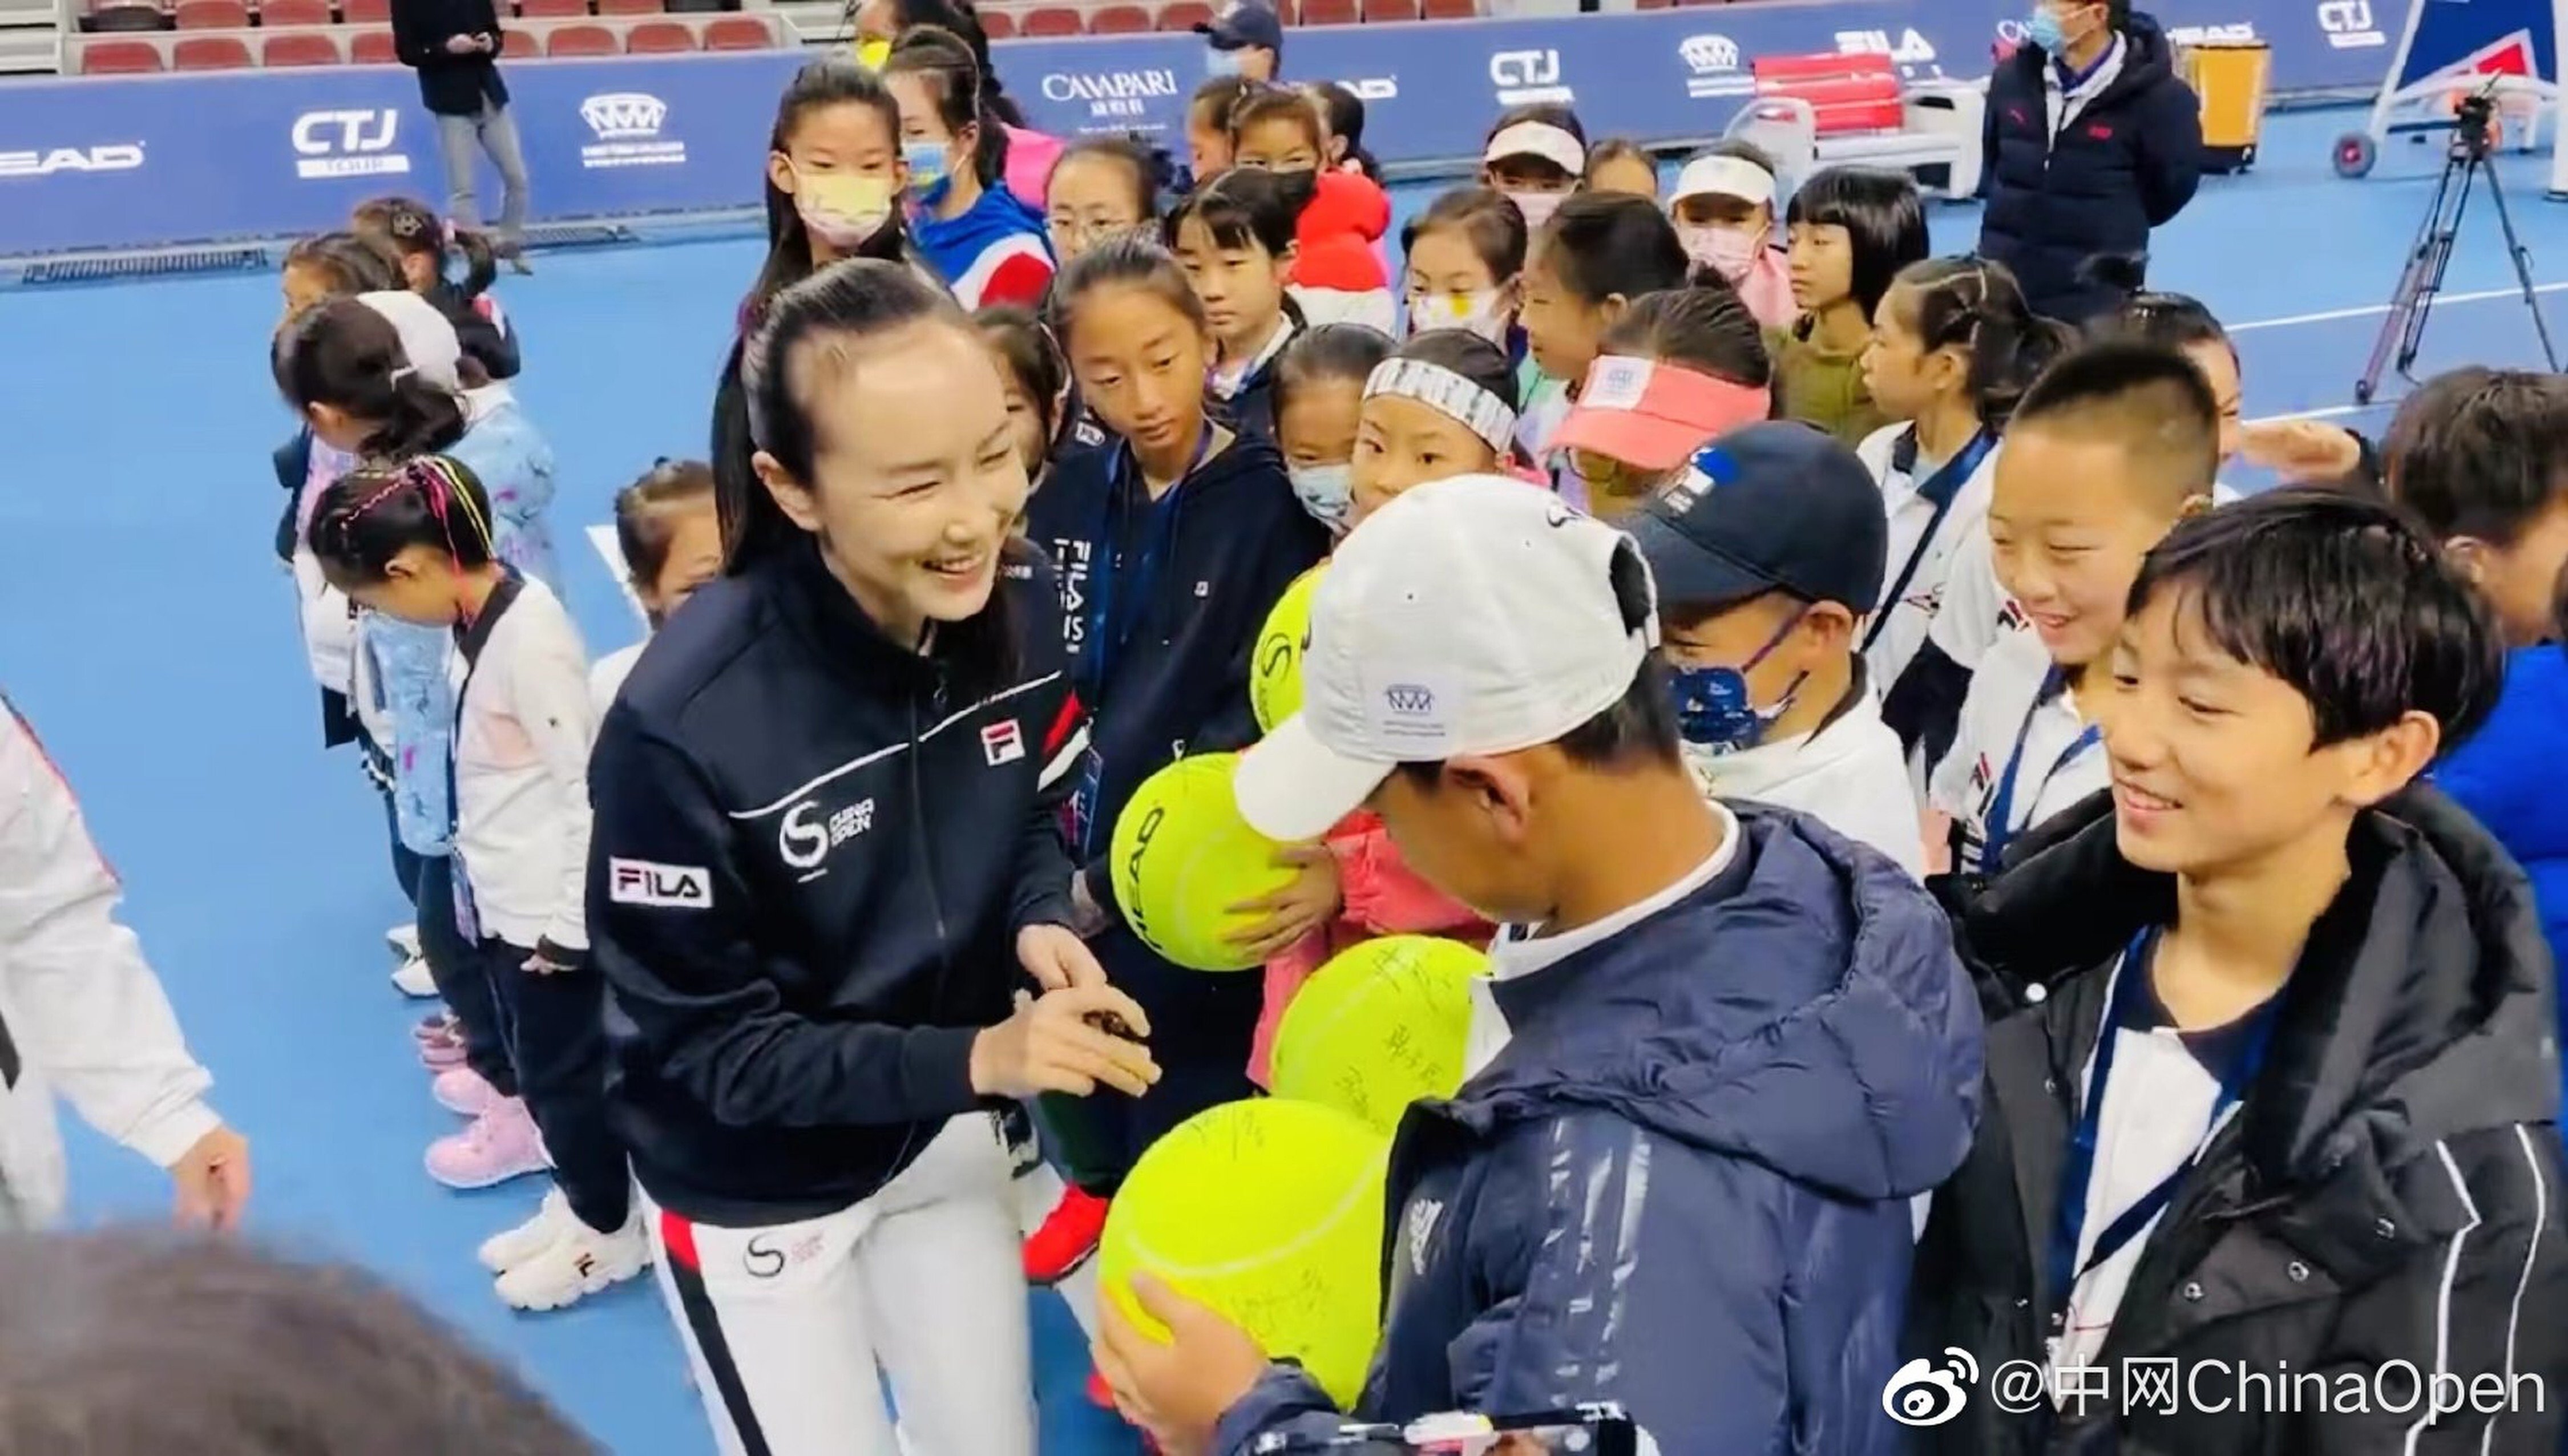 Former tennis player Peng Shuai appears at a junior tennis event in Beijing on Sunday, according to photos posted by organisers. Photo: Weibo